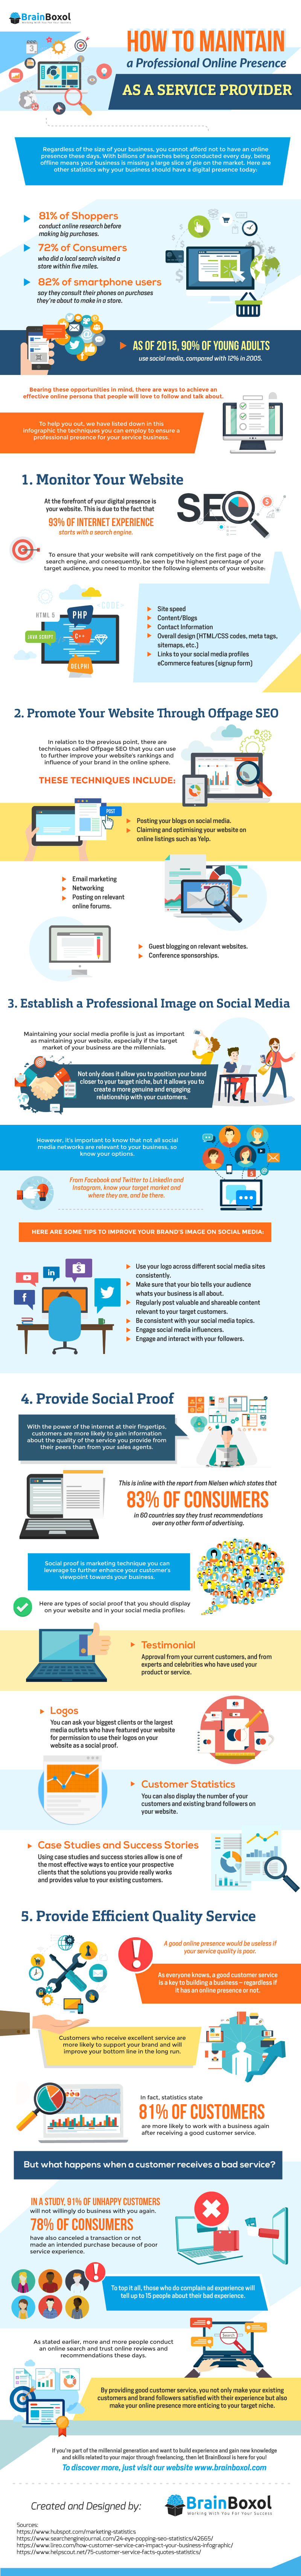 Maintaining Your Company's Online Presence - Infographic